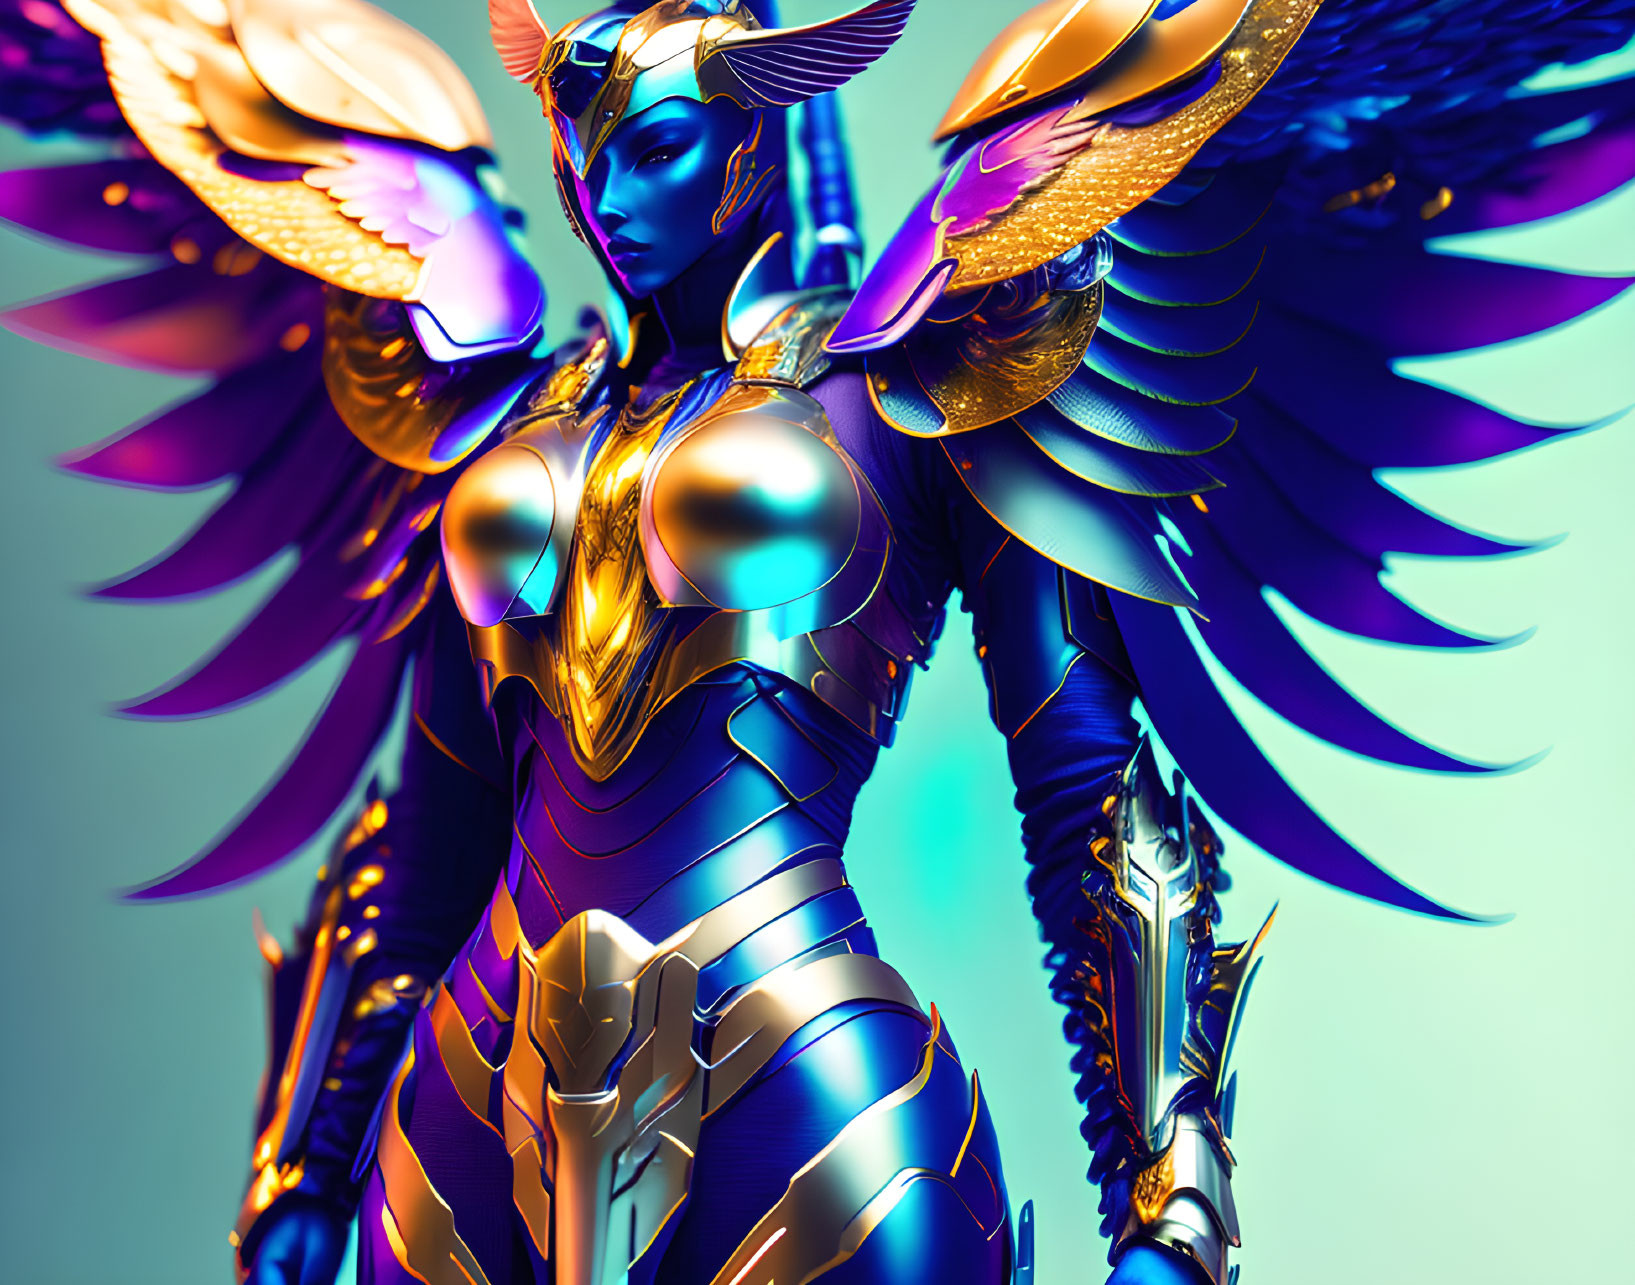 Colorful Female Warrior in Blue and Gold Armor with Winged Shoulder Pads